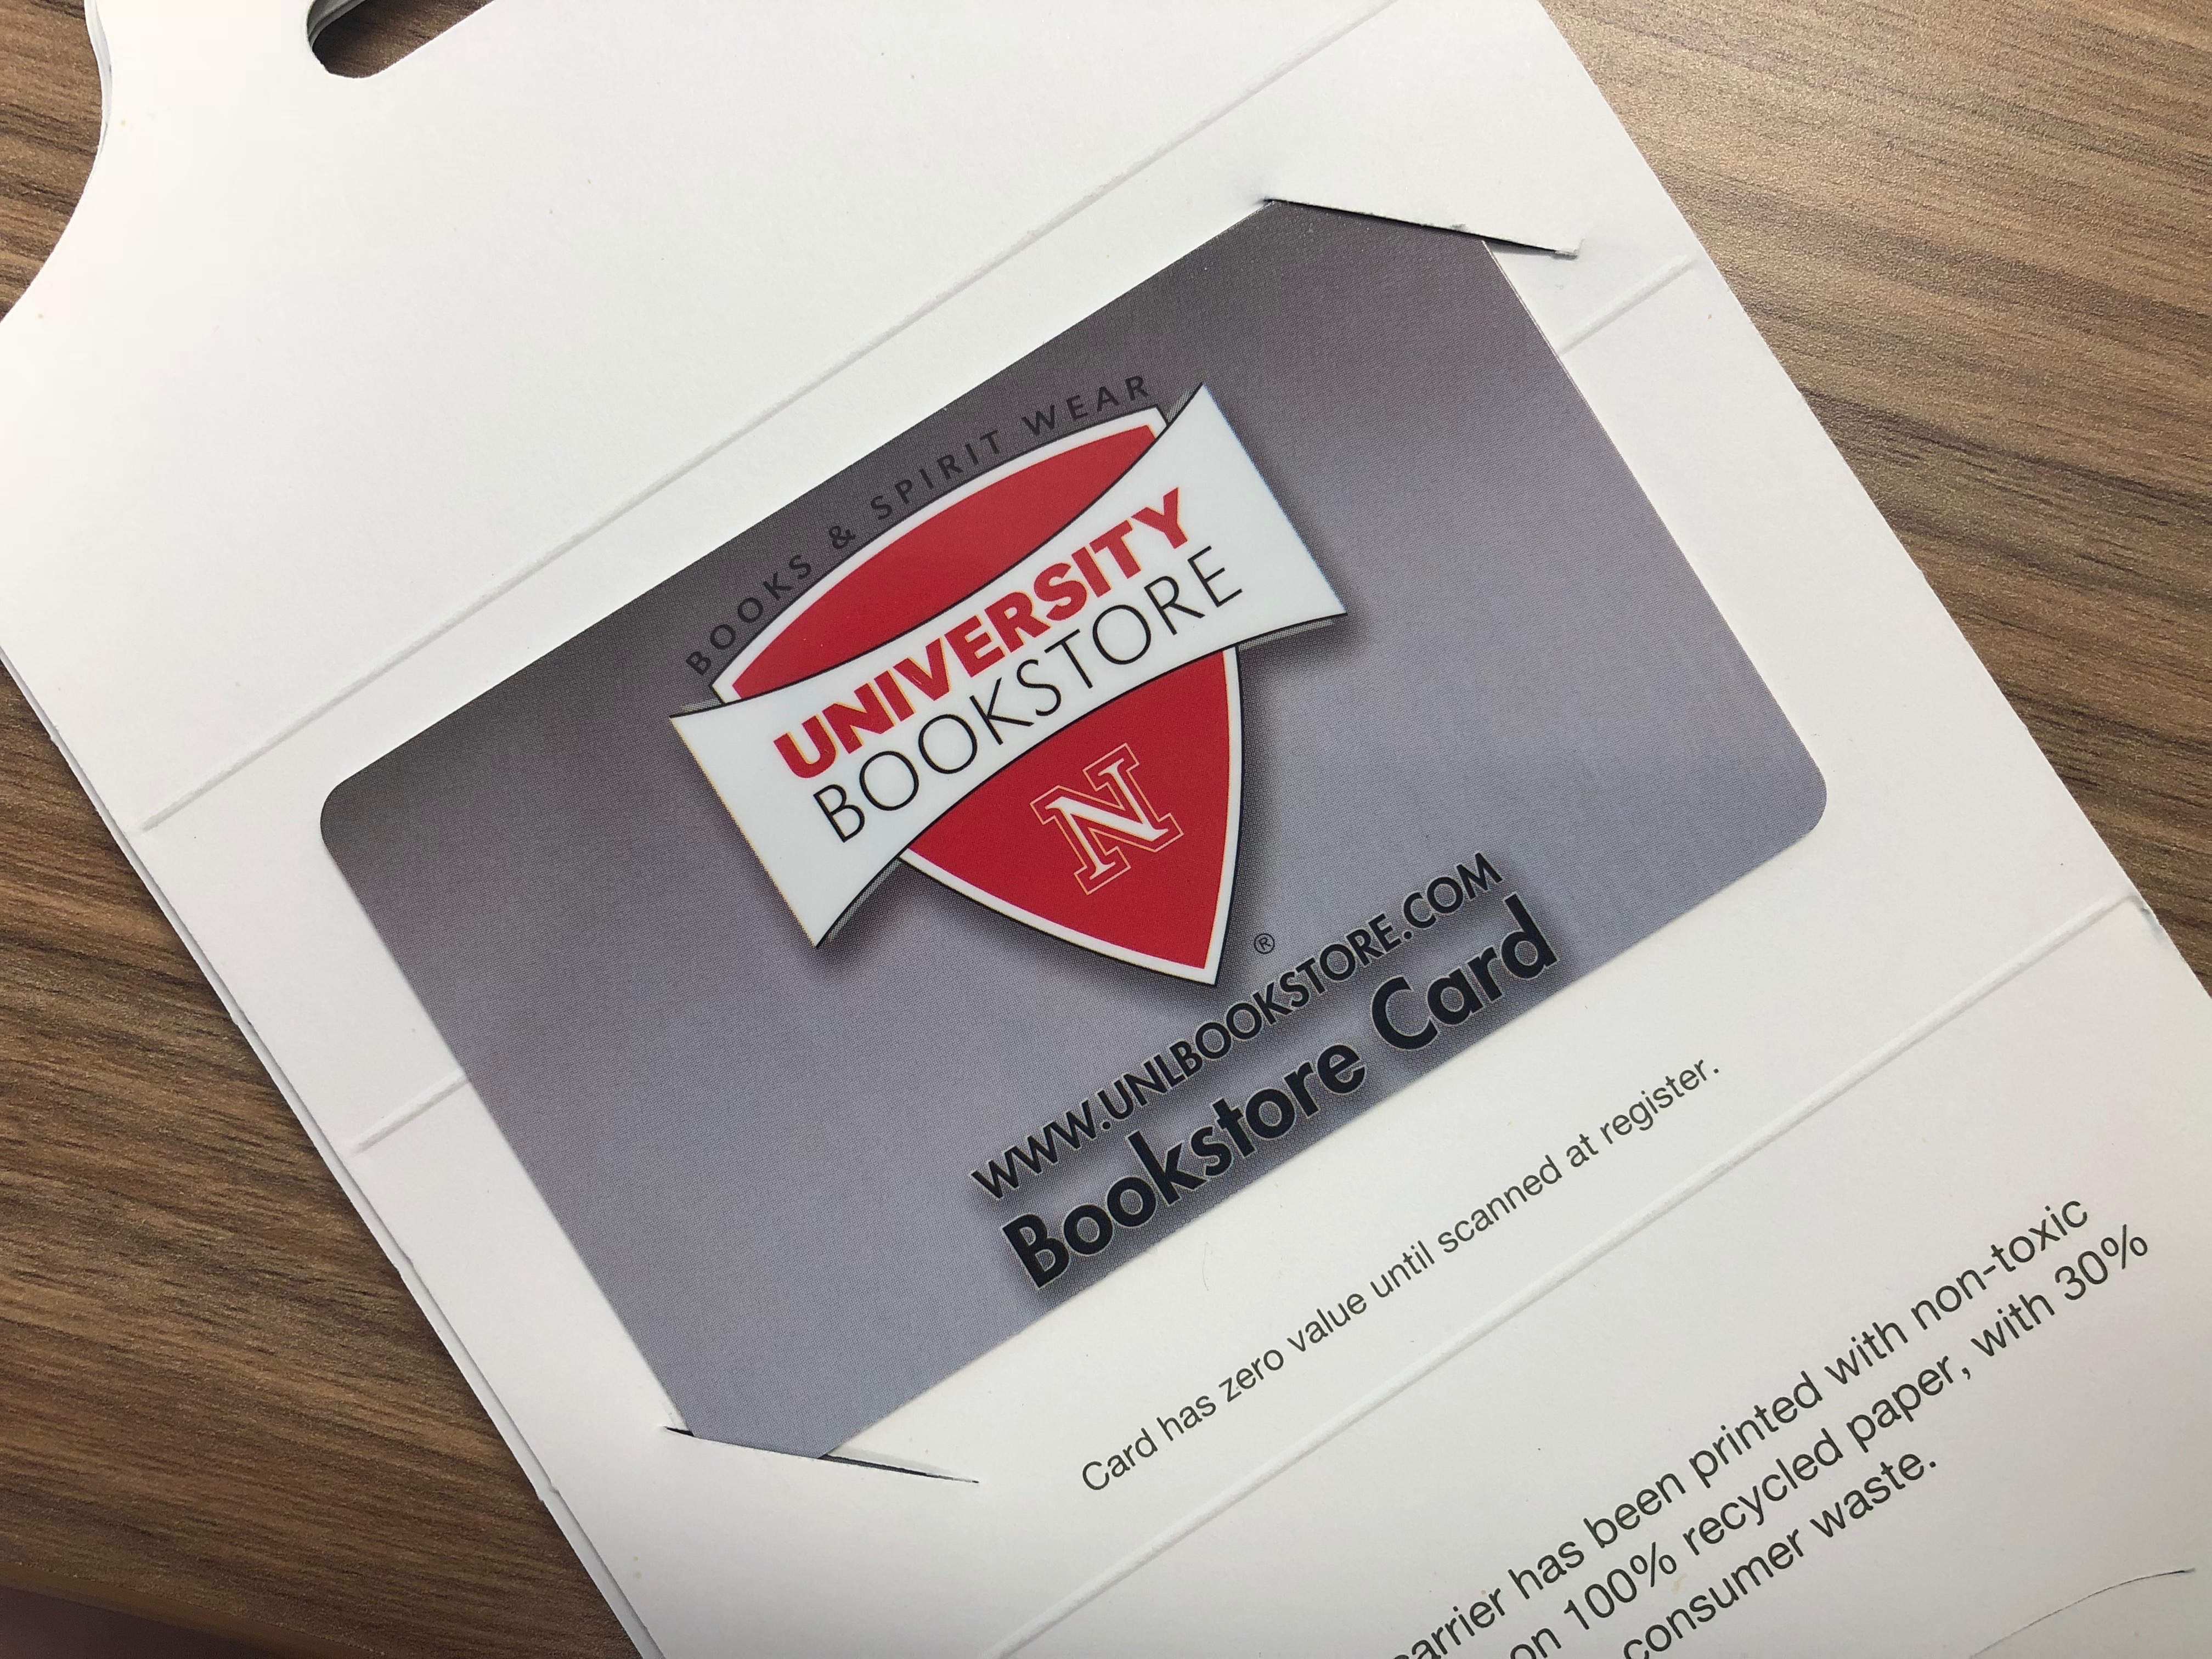 Student who participate in the search for the new Vice Chancellor for Diversity & Inclusion will receive a $20 University Bookstore gift card.